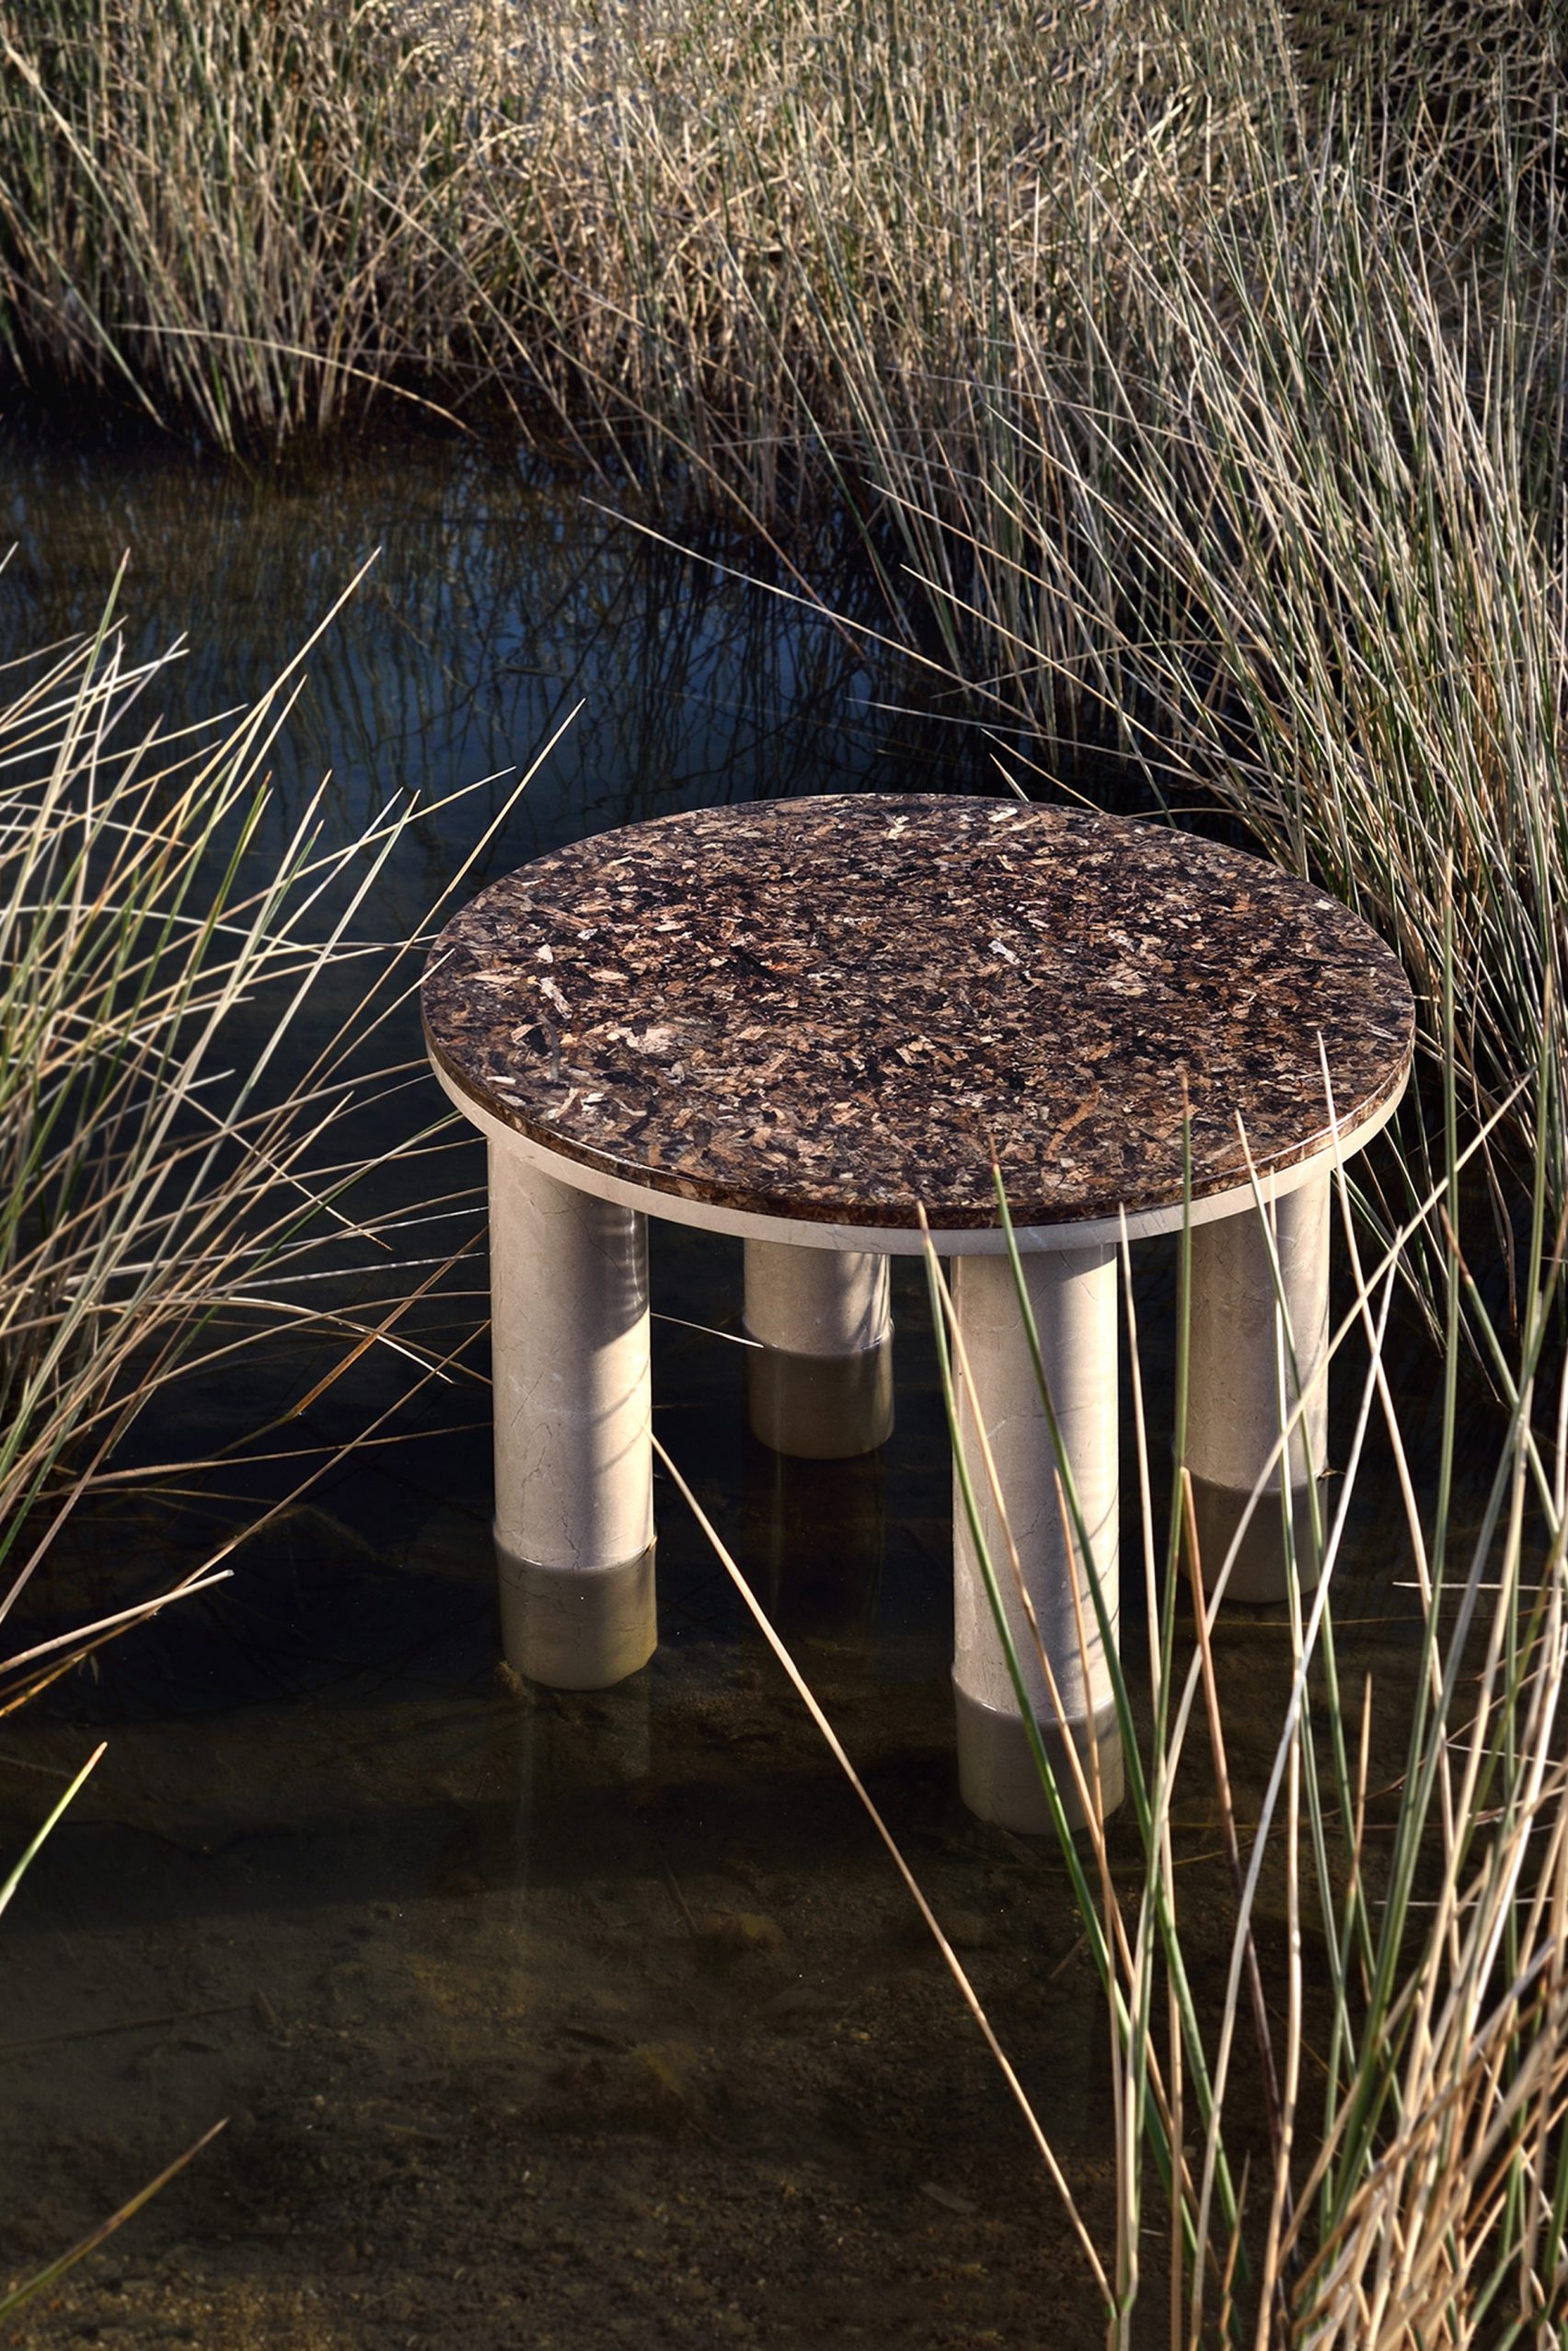 Round Oceanides table by Alex Mint in a grassy wetland